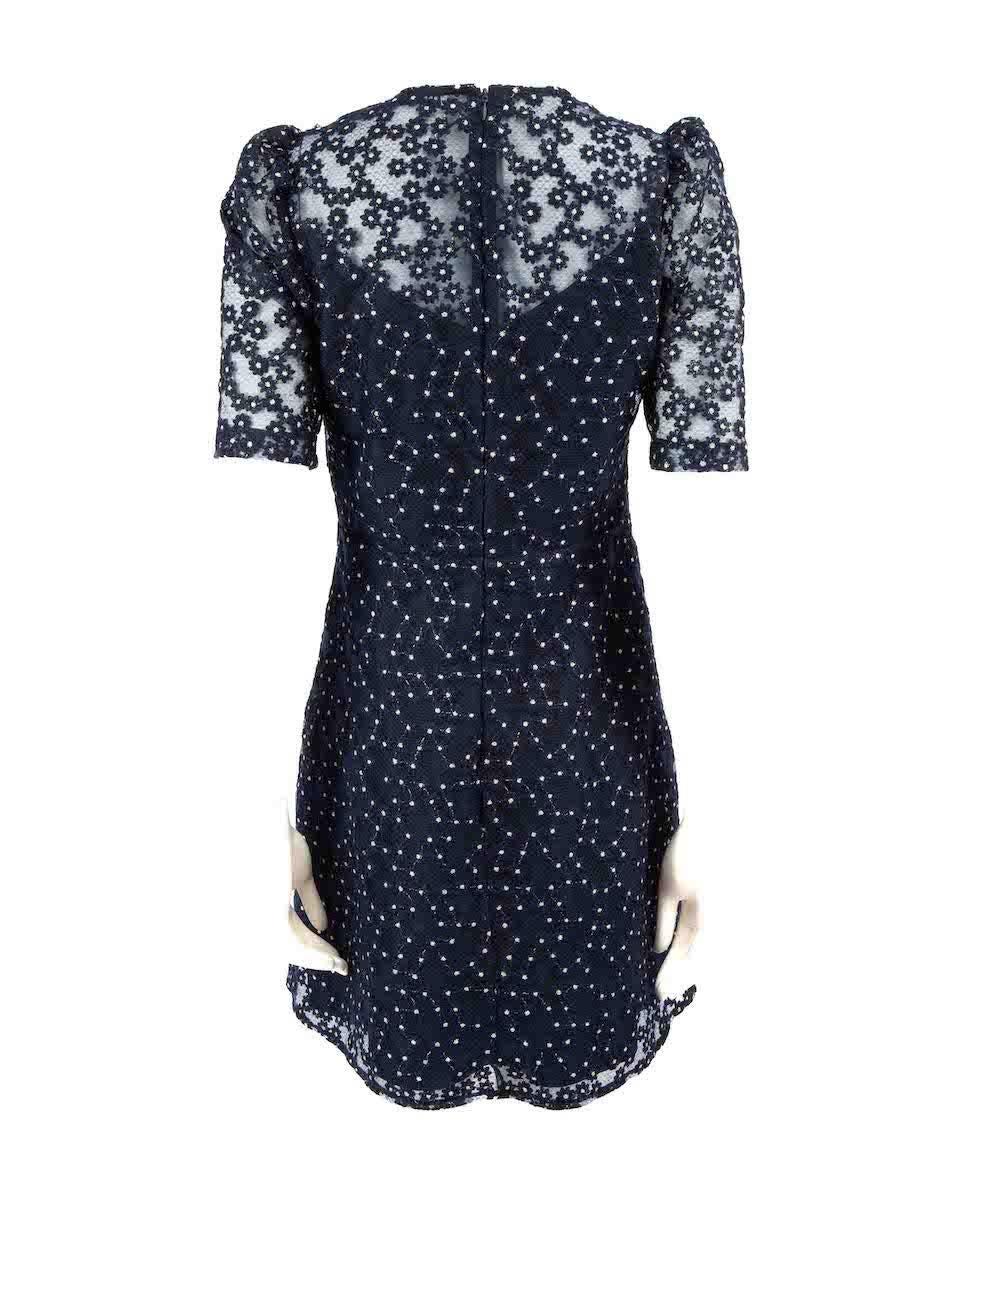 Sandro Navy Floral Lace Crystal Collar Dress Size M In Good Condition For Sale In London, GB